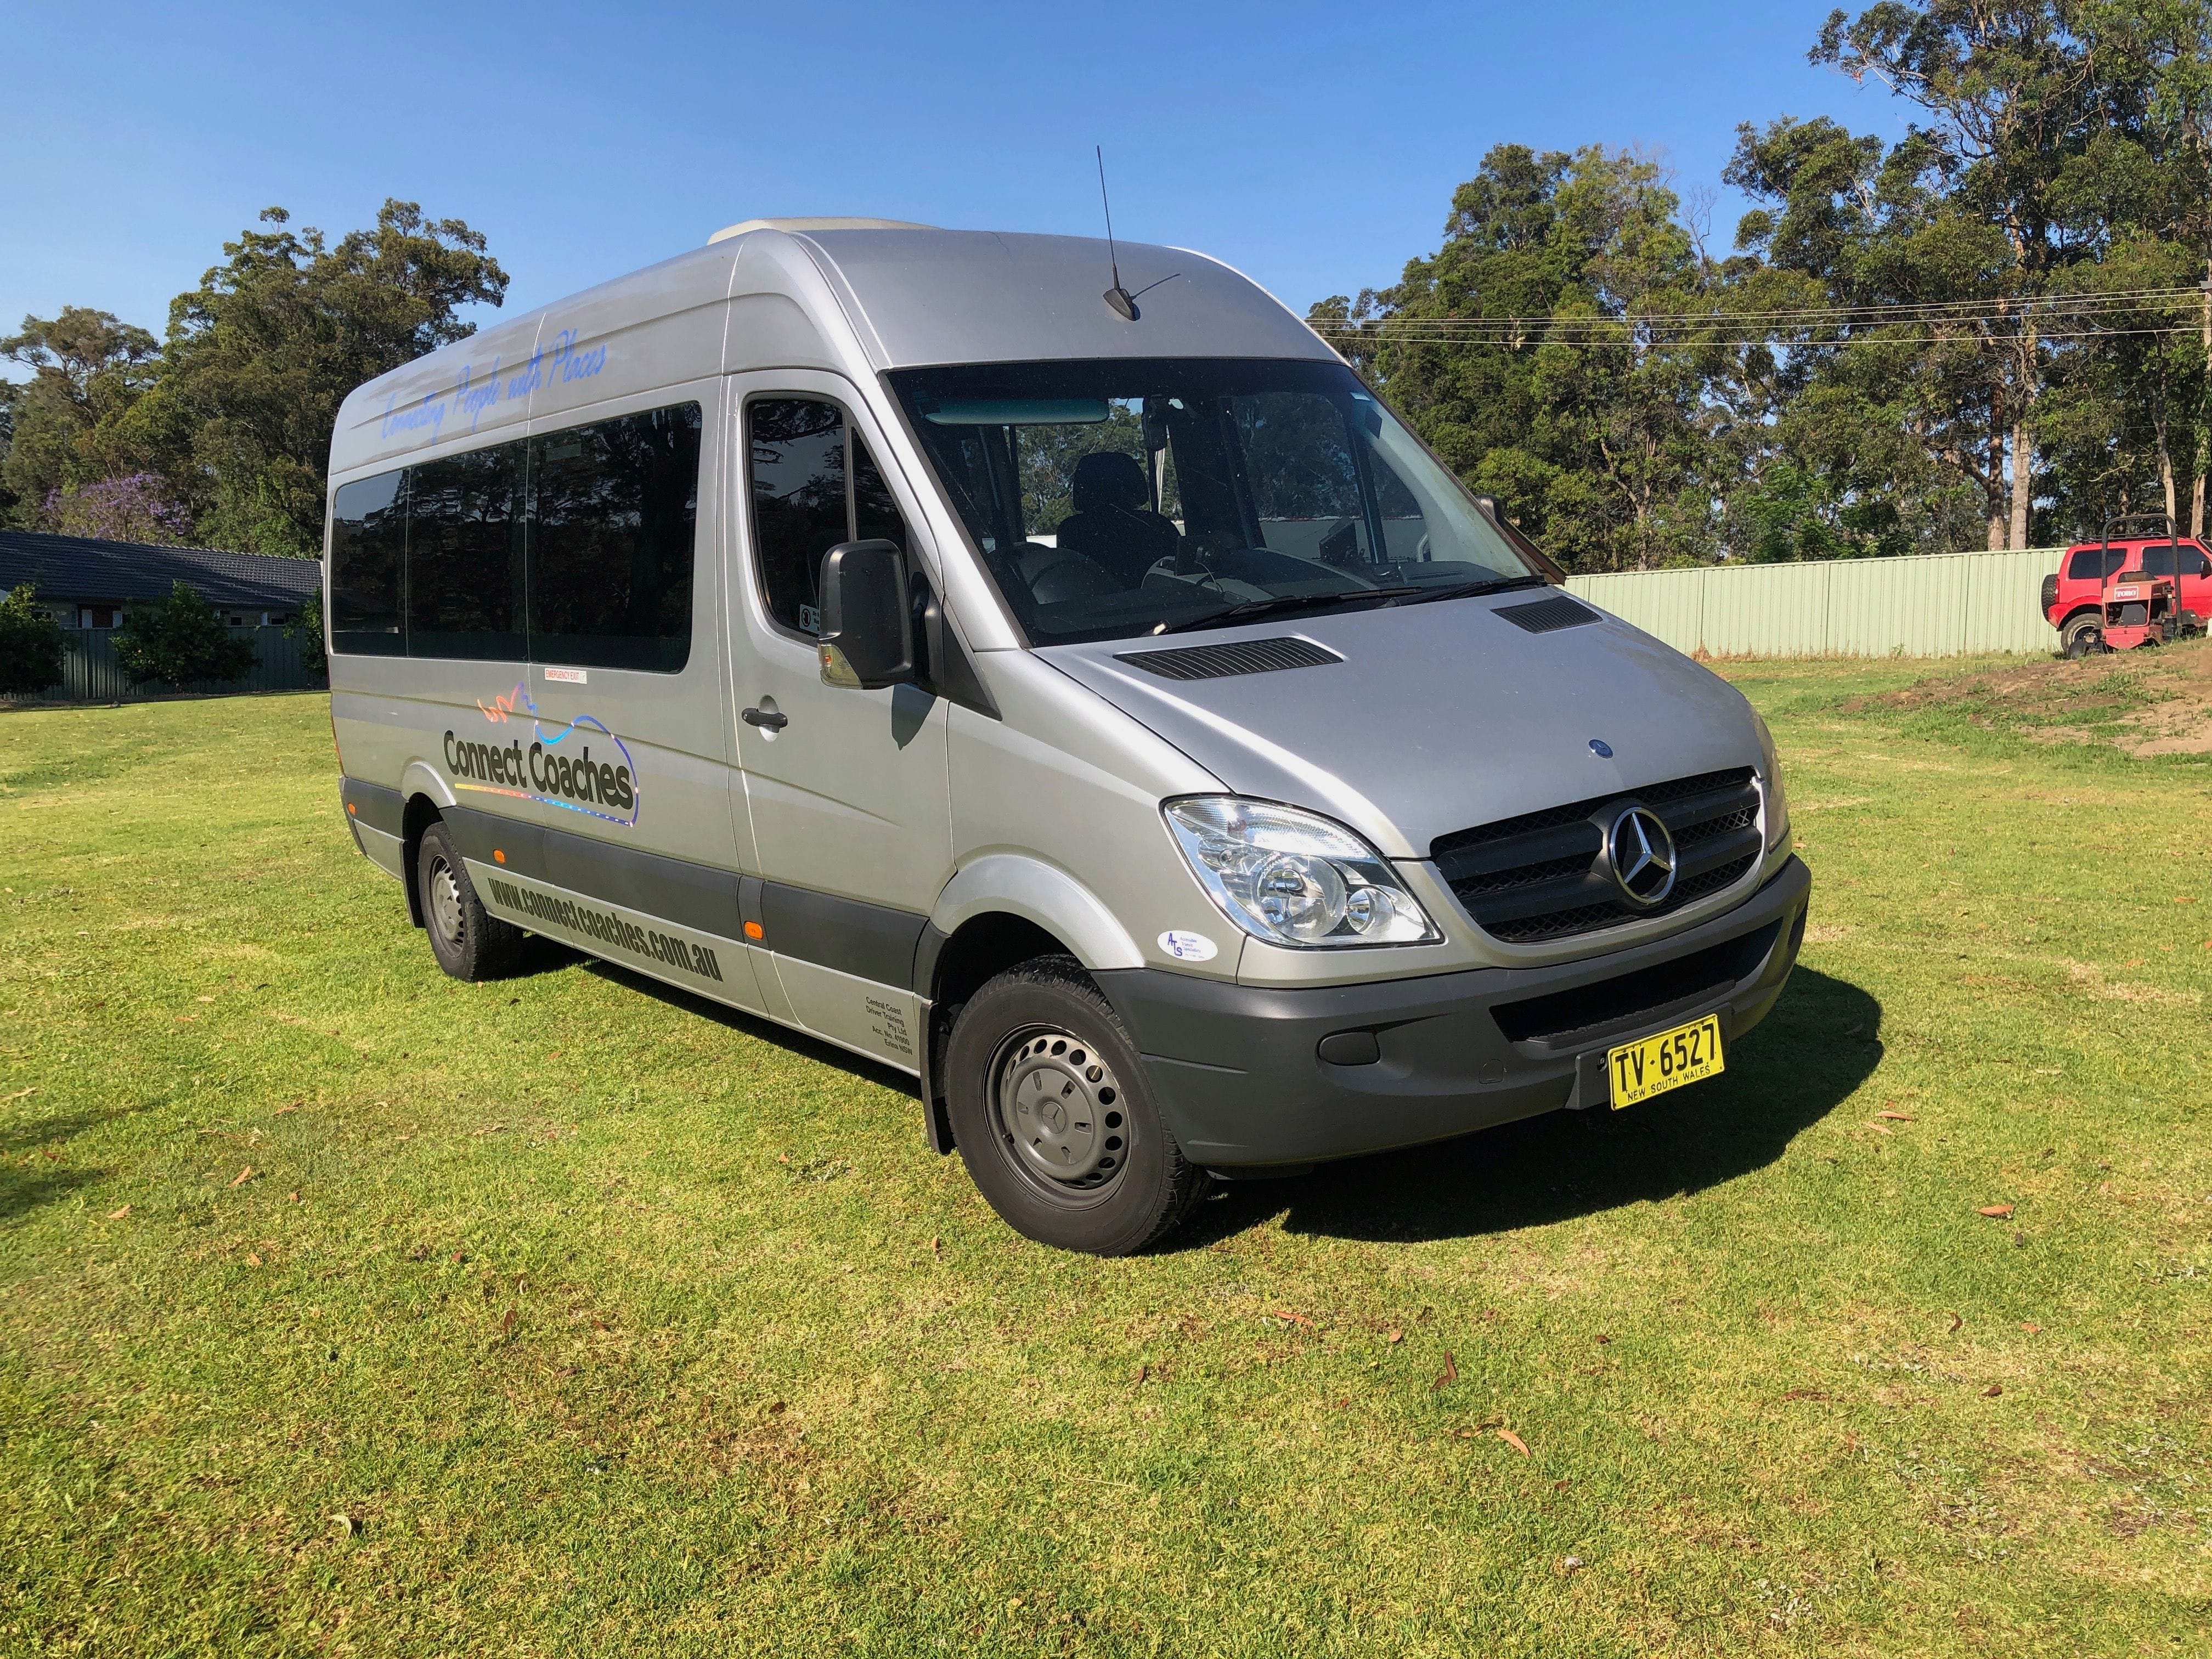 Connect Coaches 15 Seated LWB Mercedes Benz Mini Coach avaliable for school Charters